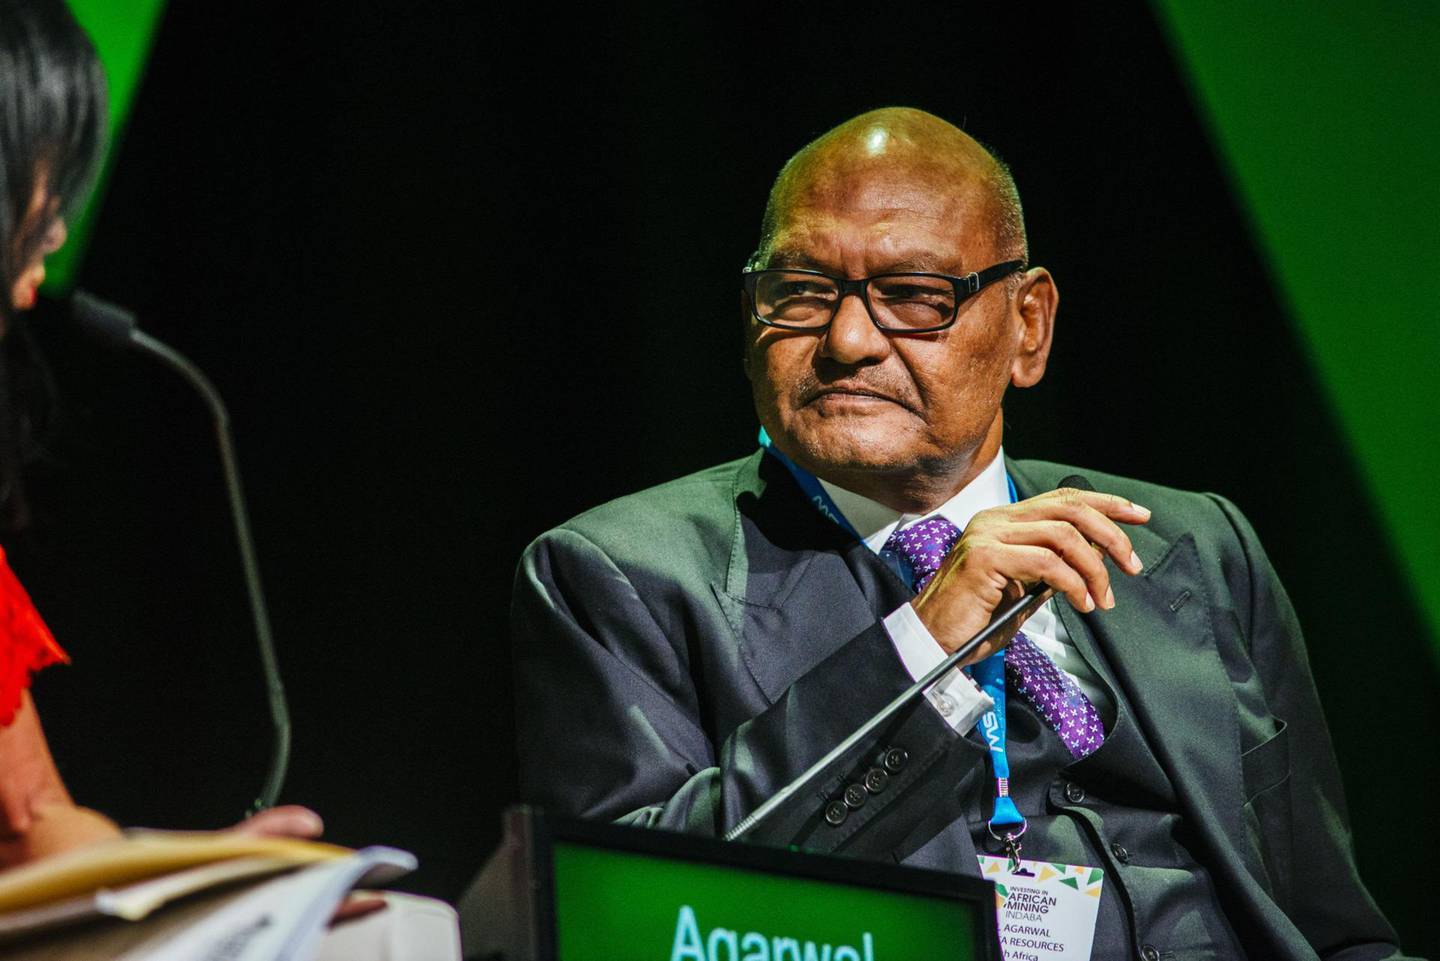 Anil Agarwal, billionaire and owner of Vedanta Resources Plc, looks on during a panel discussion on the opening day of the Investing in African Mining Indaba in Cape Town, South Africa, on Monday, Feb. 5, 2018. Mining executives, investors and government ministers are meeting in drought-hit Cape Town for the African Mining Indaba, the continent’s biggest gathering of one of its most vital industries. Photographer: Waldo Swiegers/Bloomberg